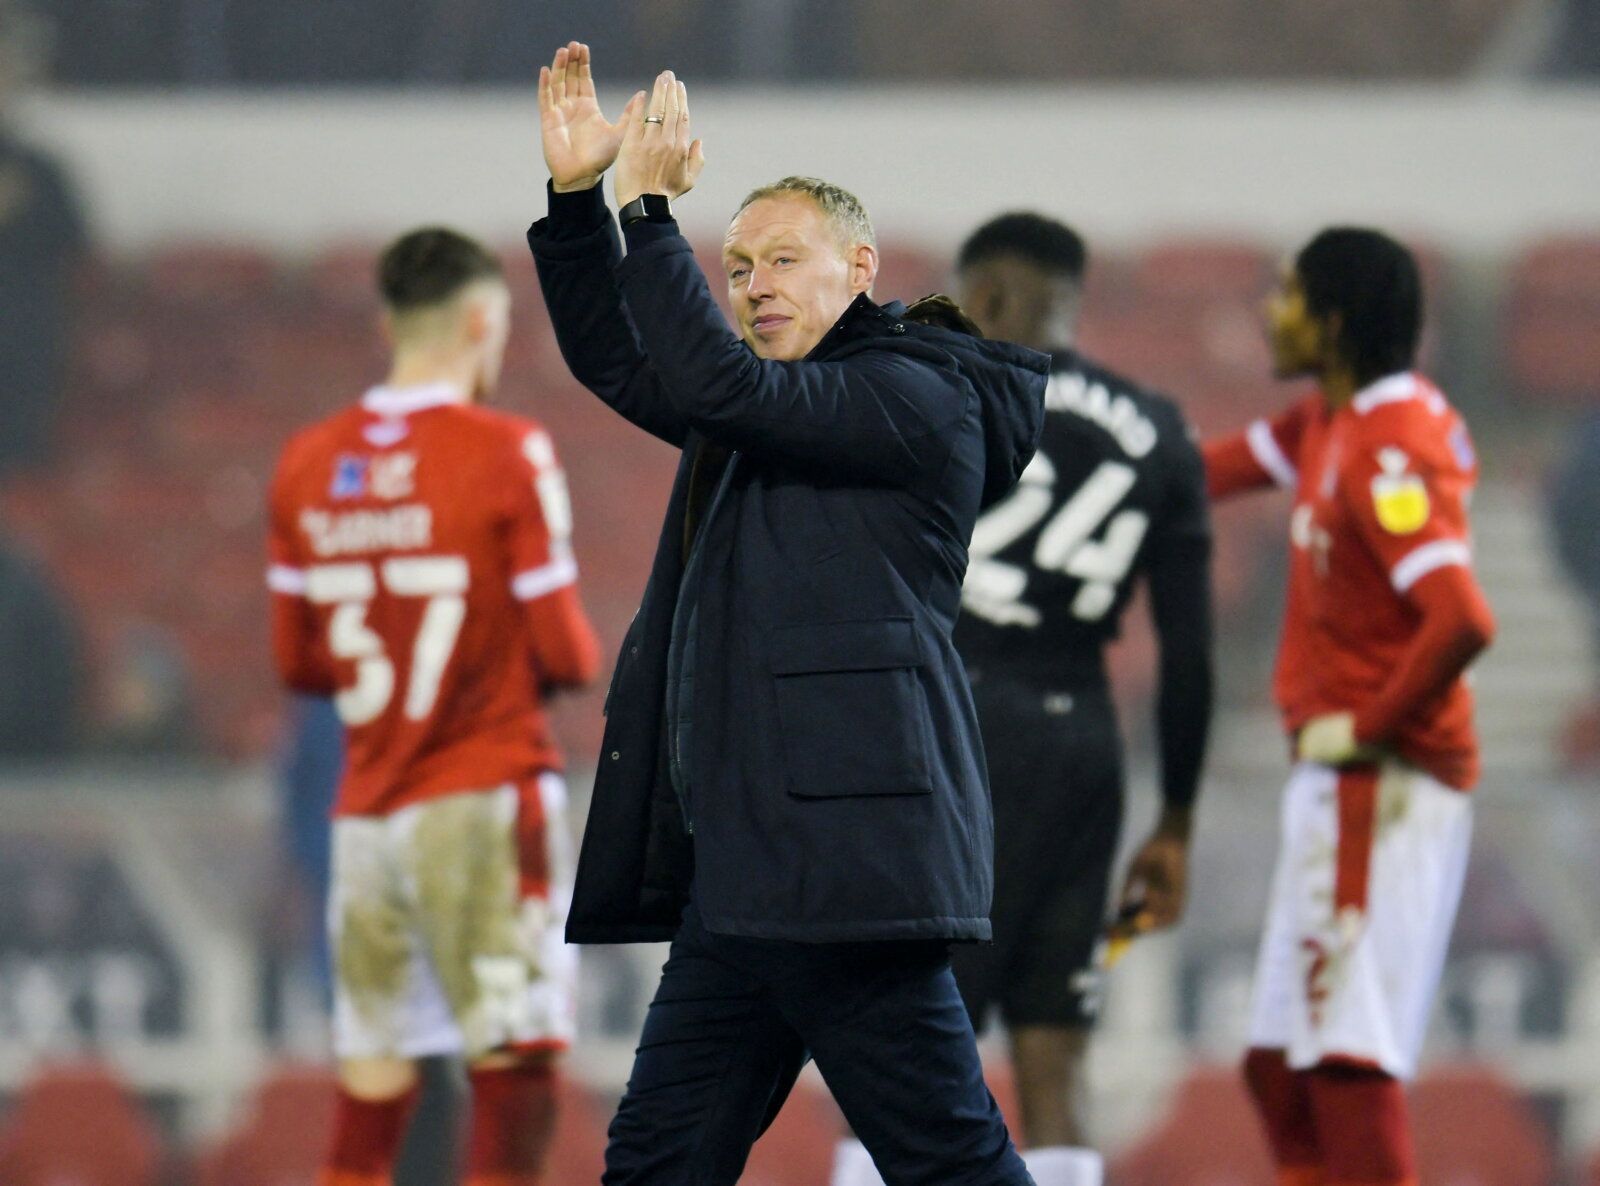 Soccer Football -  Championship - Nottingham Forest v Hull City - The City Ground, Nottingham, Britain - December 18, 2021 Nottingham Forest manager Steve Cooper celebrates after the match  Action Images/Paul Burrows  EDITORIAL USE ONLY. No use with unauthorized audio, video, data, fixture lists, club/league logos or "live" services. Online in-match use limited to 75 images, no video emulation. No use in betting, games or single club/league/player publications.  Please contact your account repre